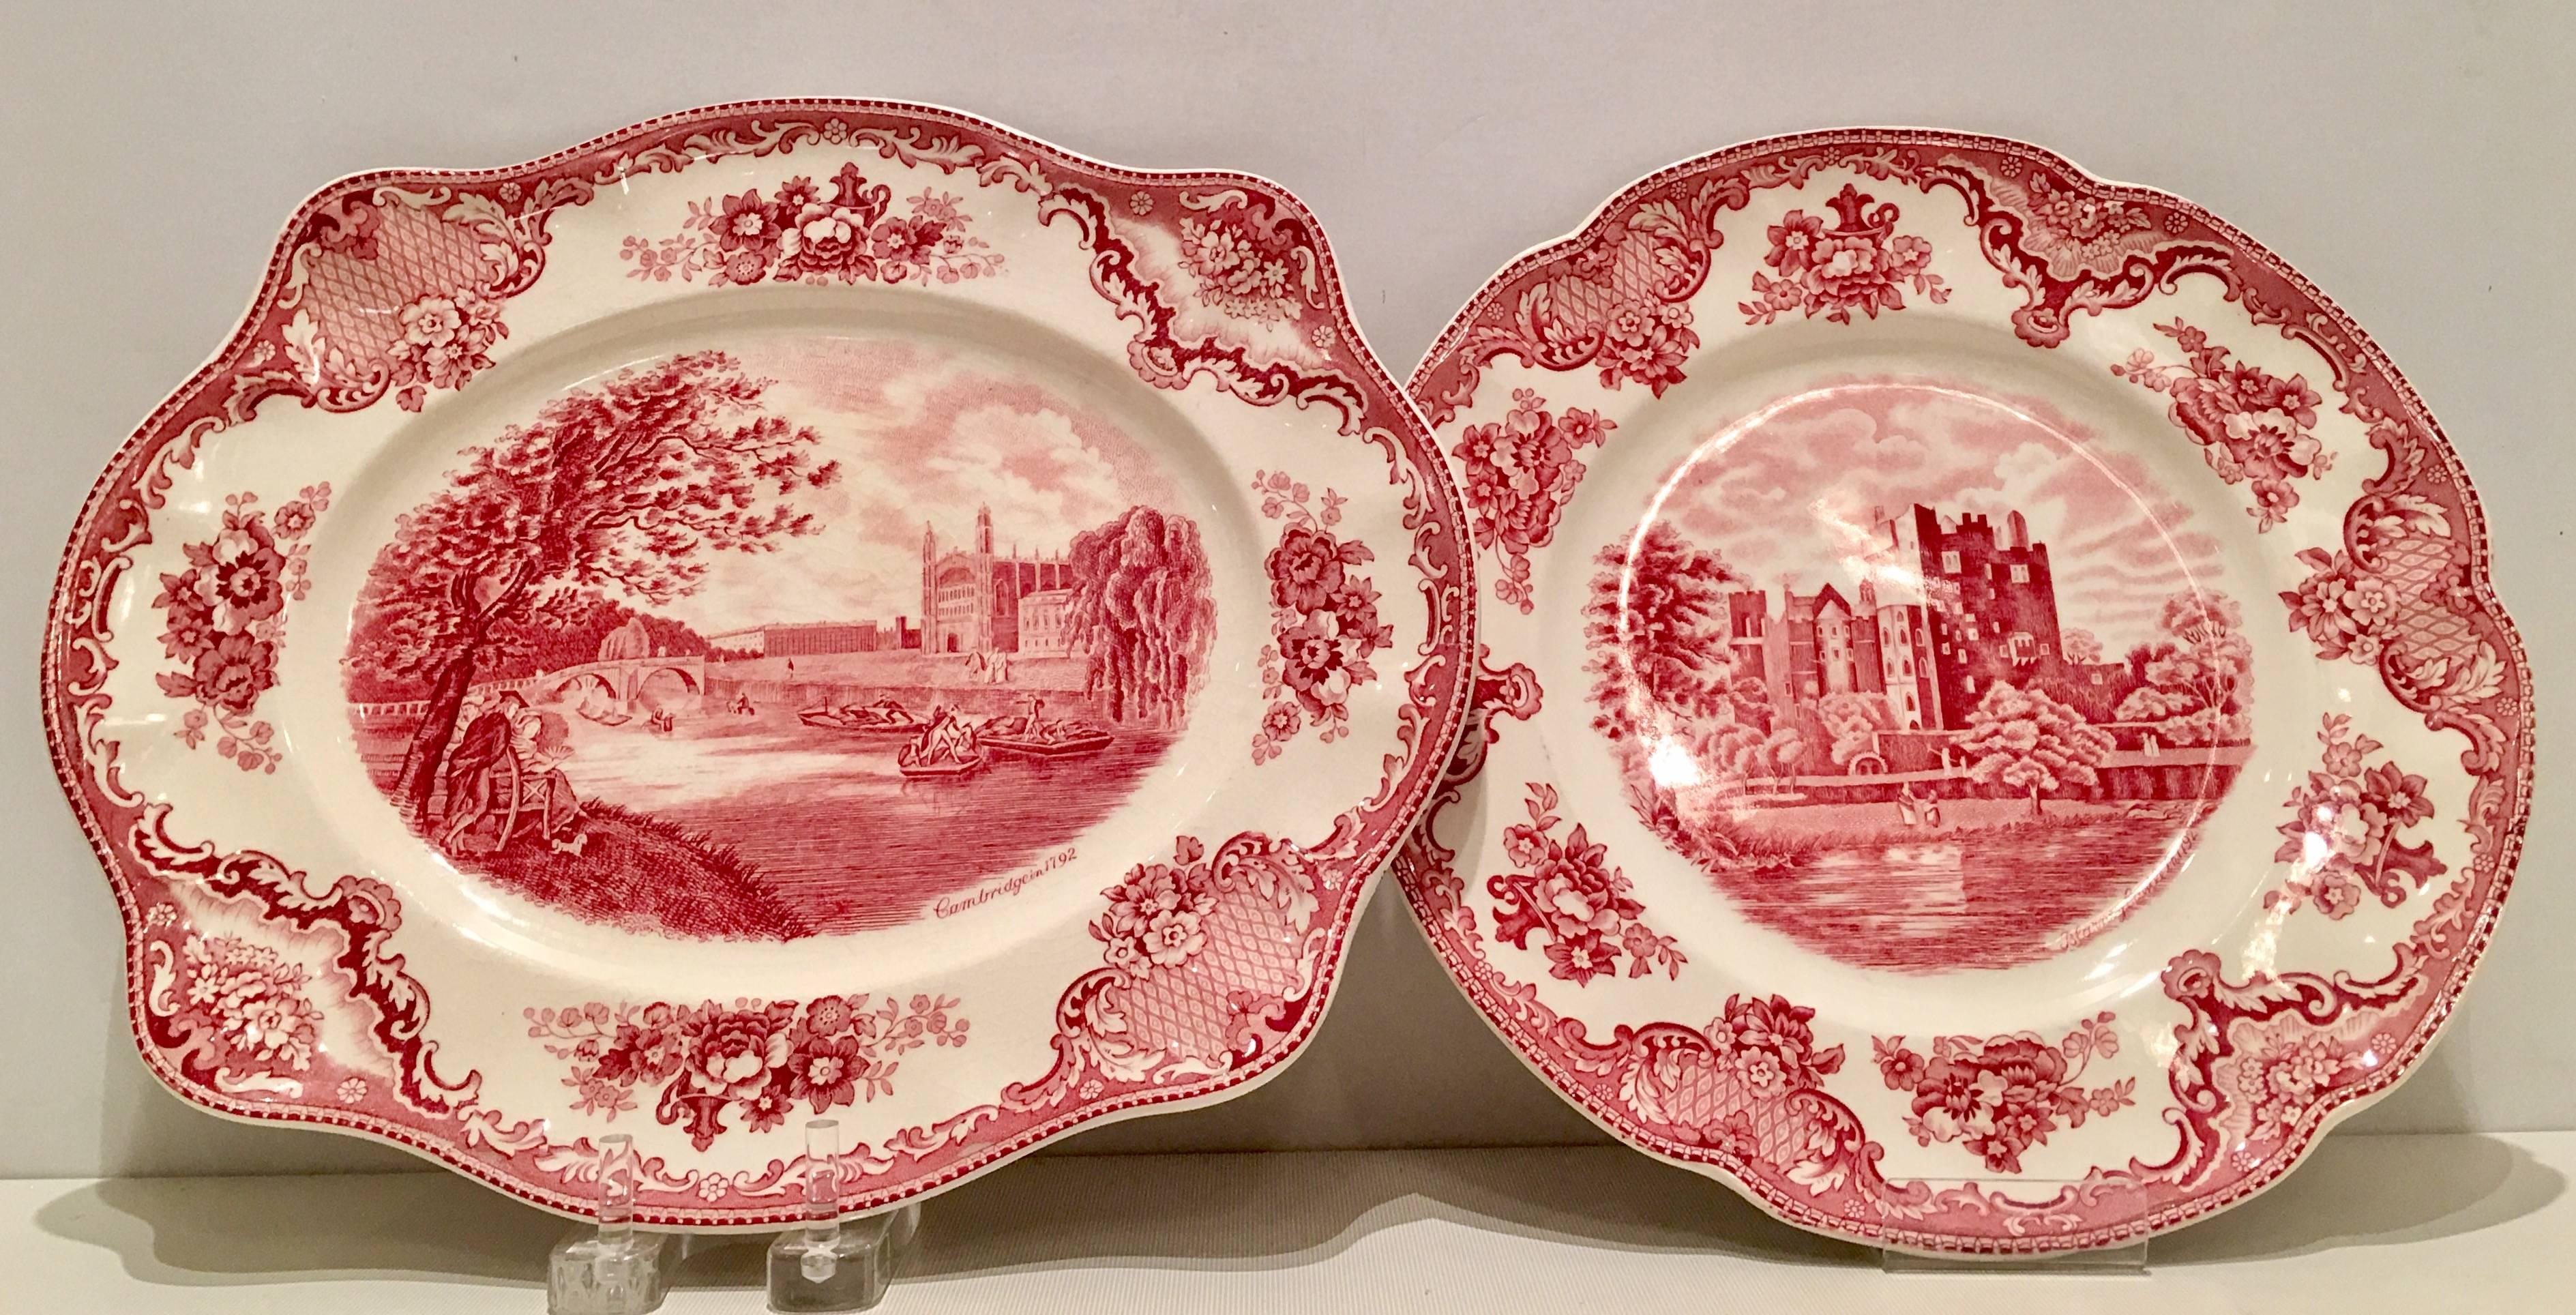 1920'S English transferware "Old Britain Castles" in pink. This eleven piece set includes, one oval serving platter, four dinner plates, four rim soup bowls and two bread plates. Each piece has the red crown Johnson Brothers crown back